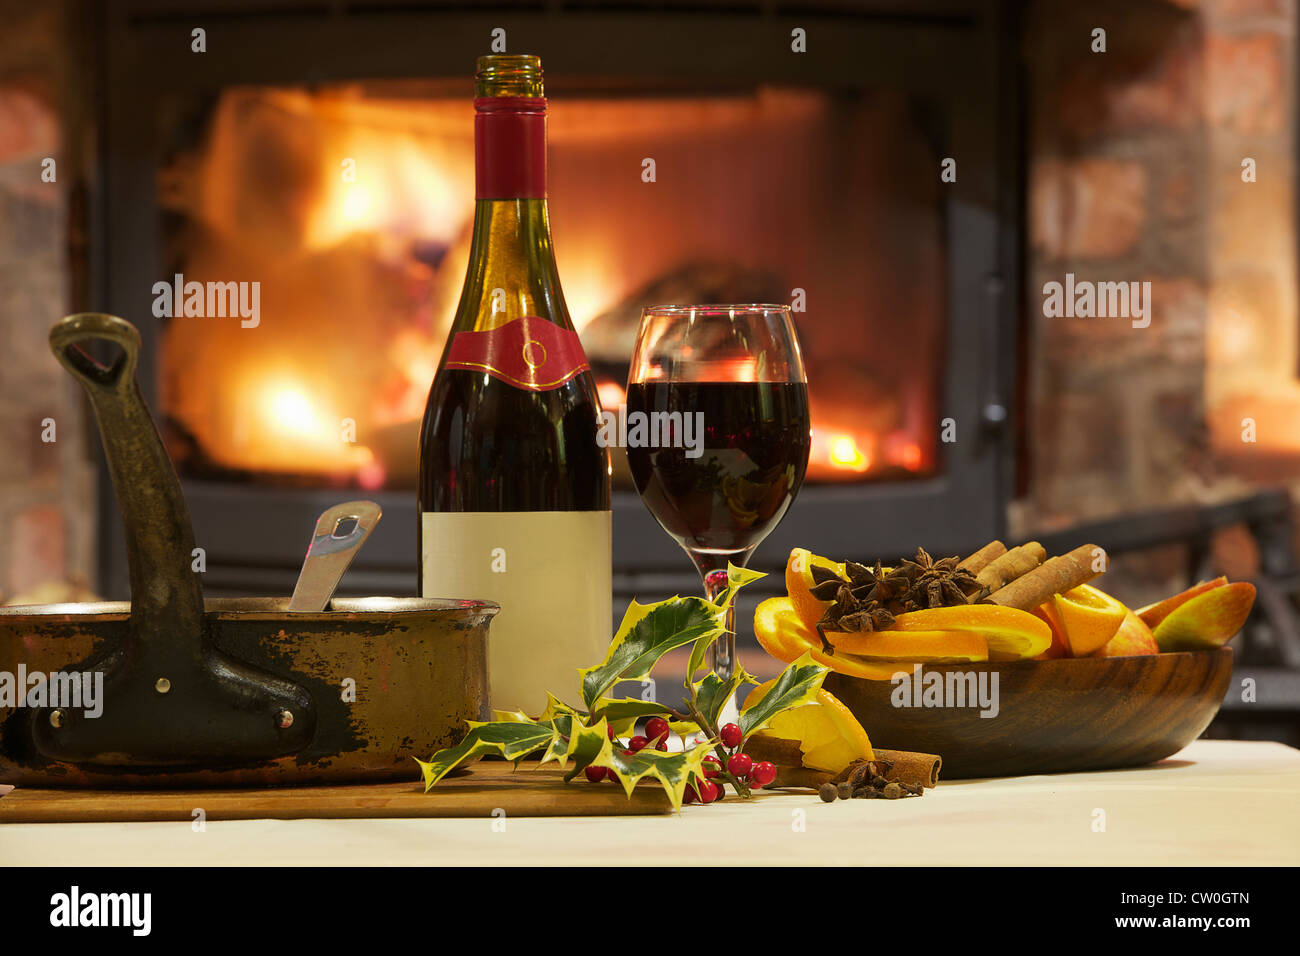 Mulled wine and spices at table Stock Photo